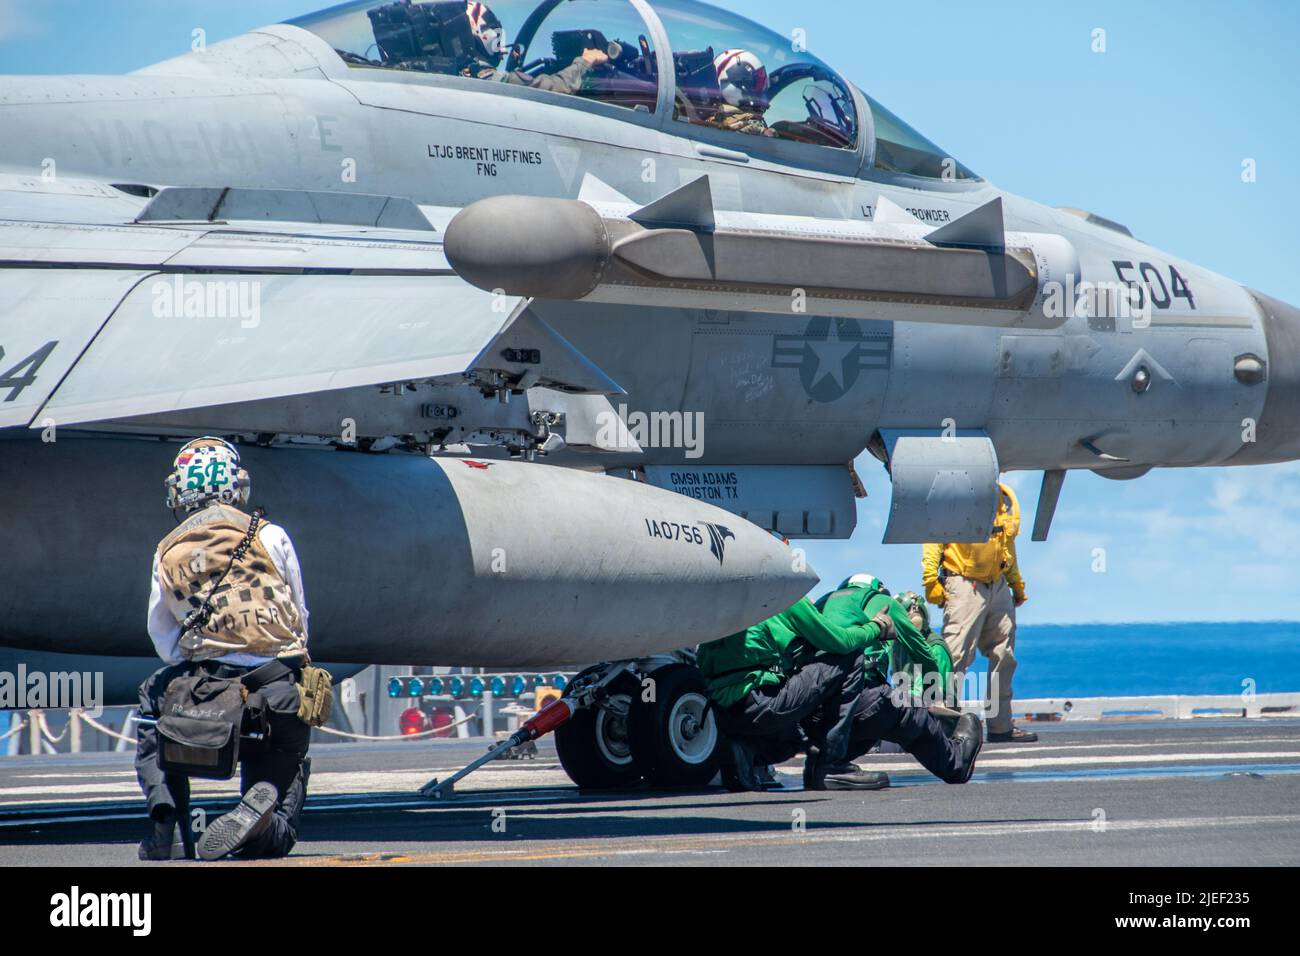 220620-N-BR419-1035 PHILIPPINE SEA (June 20, 2022) Sailors conduct catapult checks as an EA-18G Growler attached to the Shadowhawks of Electronic Attack Squadron (VAQ) 141, prepares to launch from the flight deck of the U.S. Navy’s only forward-deployed aircraft carrier USS Ronald Reagan (CVN 76). The primary role of EA-18G Growlers is to disrupt the ability to communicate between units in combat through the use of electronic warfare. Ronald Reagan, the flagship of Carrier Strike Group 5, provides a combat-ready force that protects and defends the United States, and supports alliances, partner Stock Photo